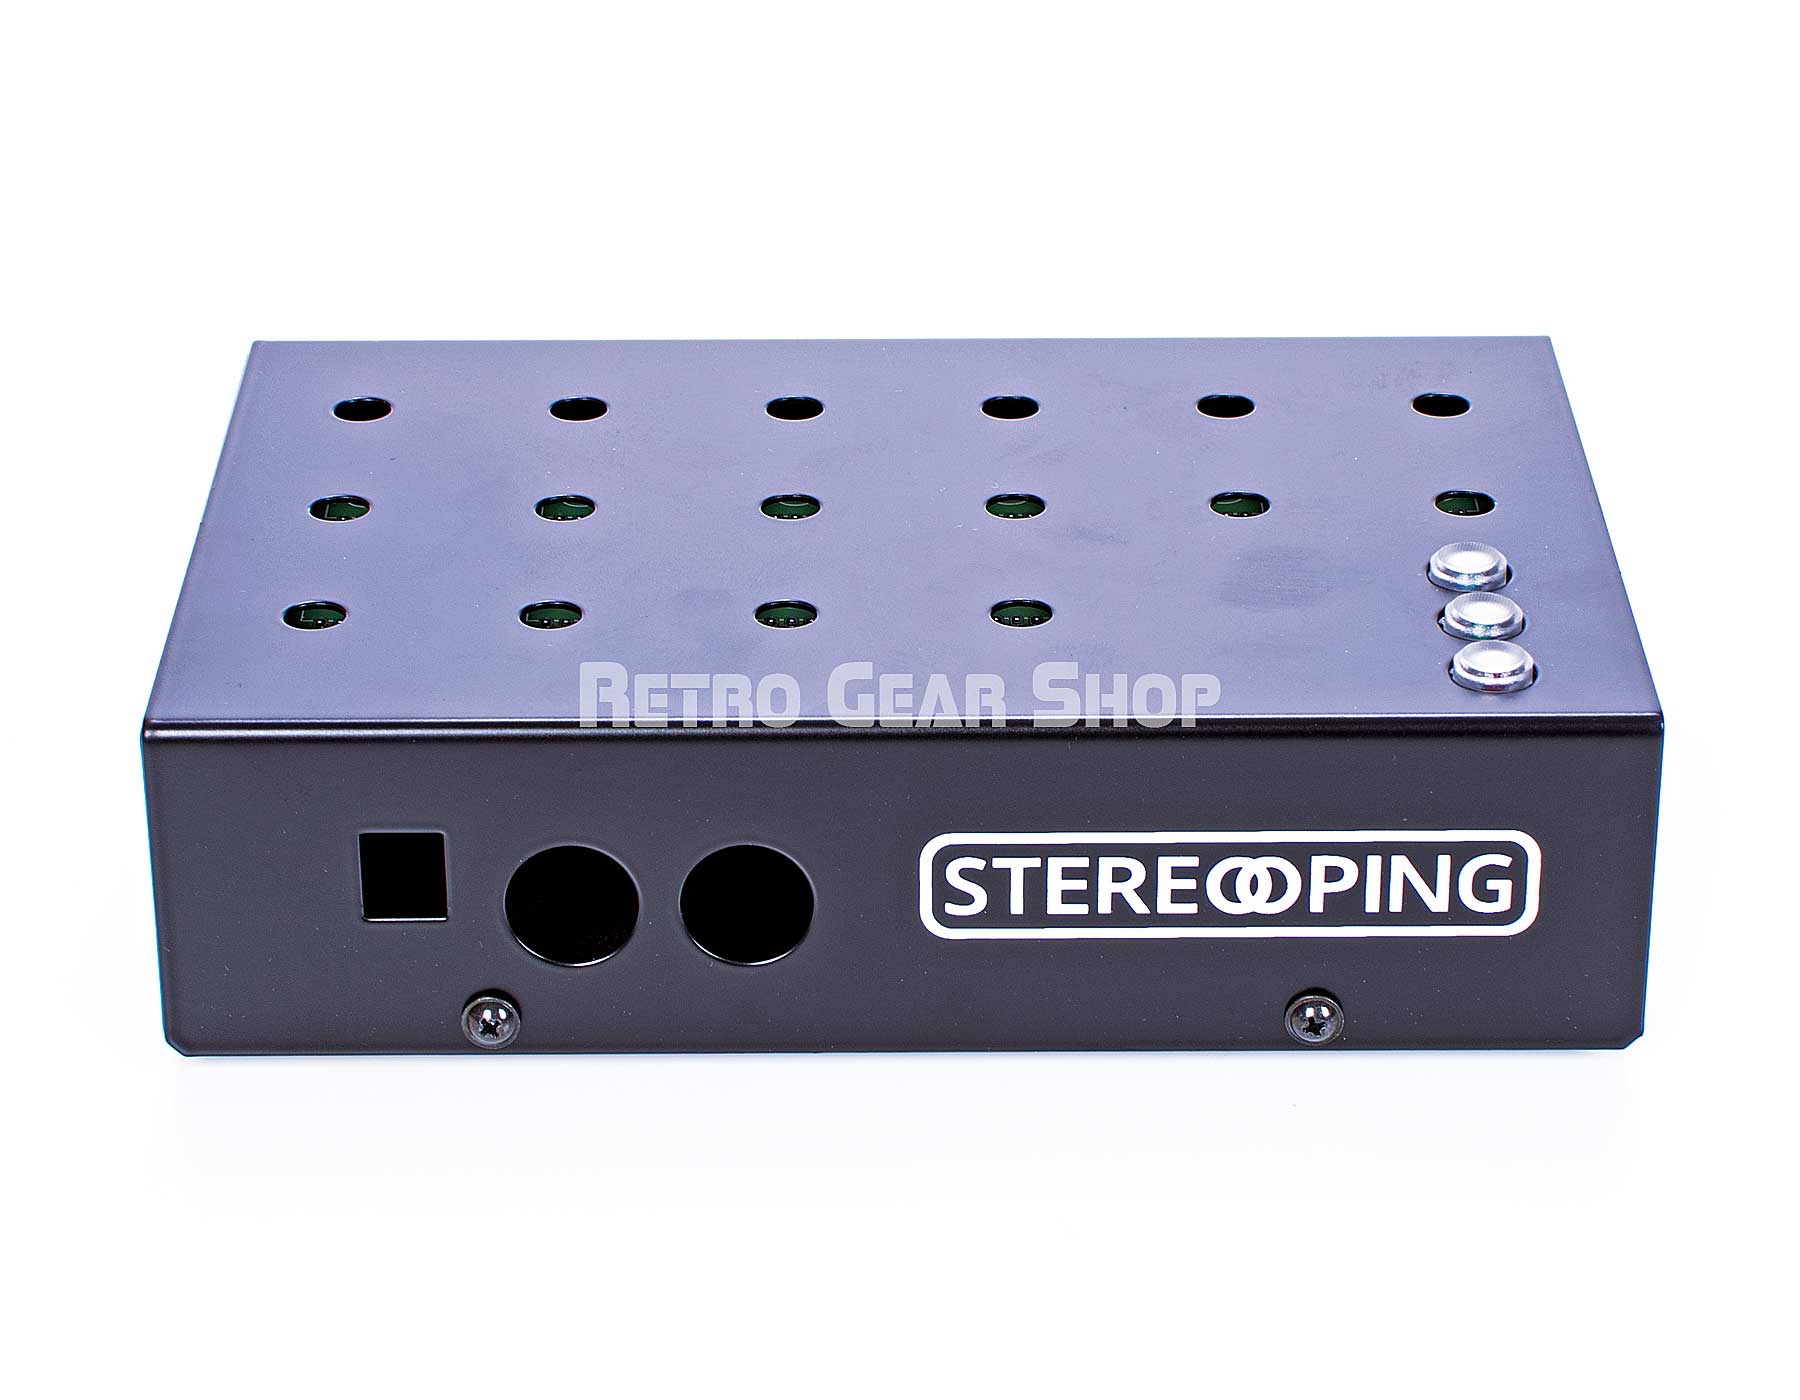 Stereoping CE-1 DIY Kit Case Rear